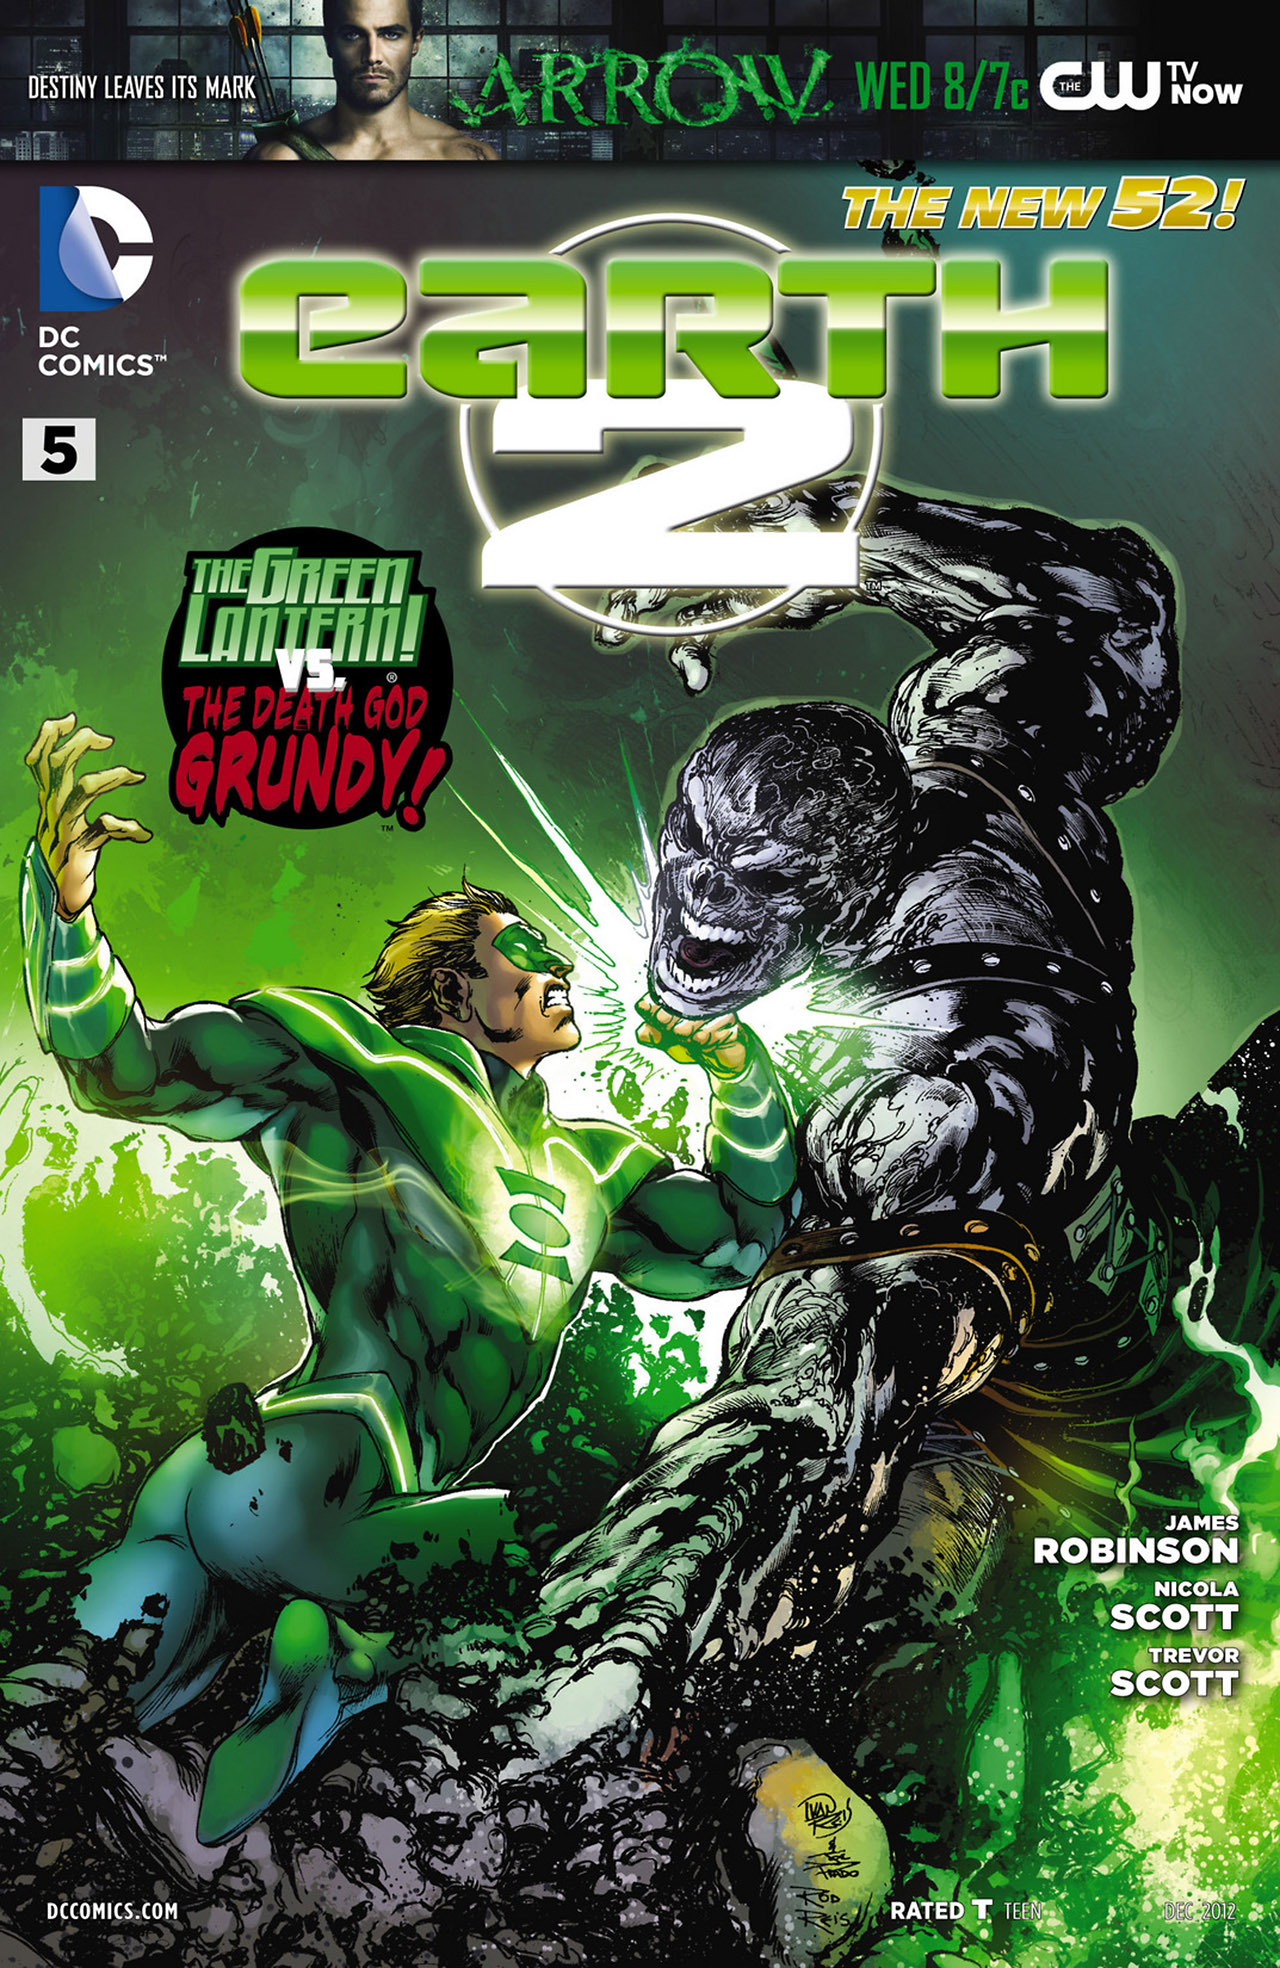 Earth 2, Vol. 5 by Tom Taylor